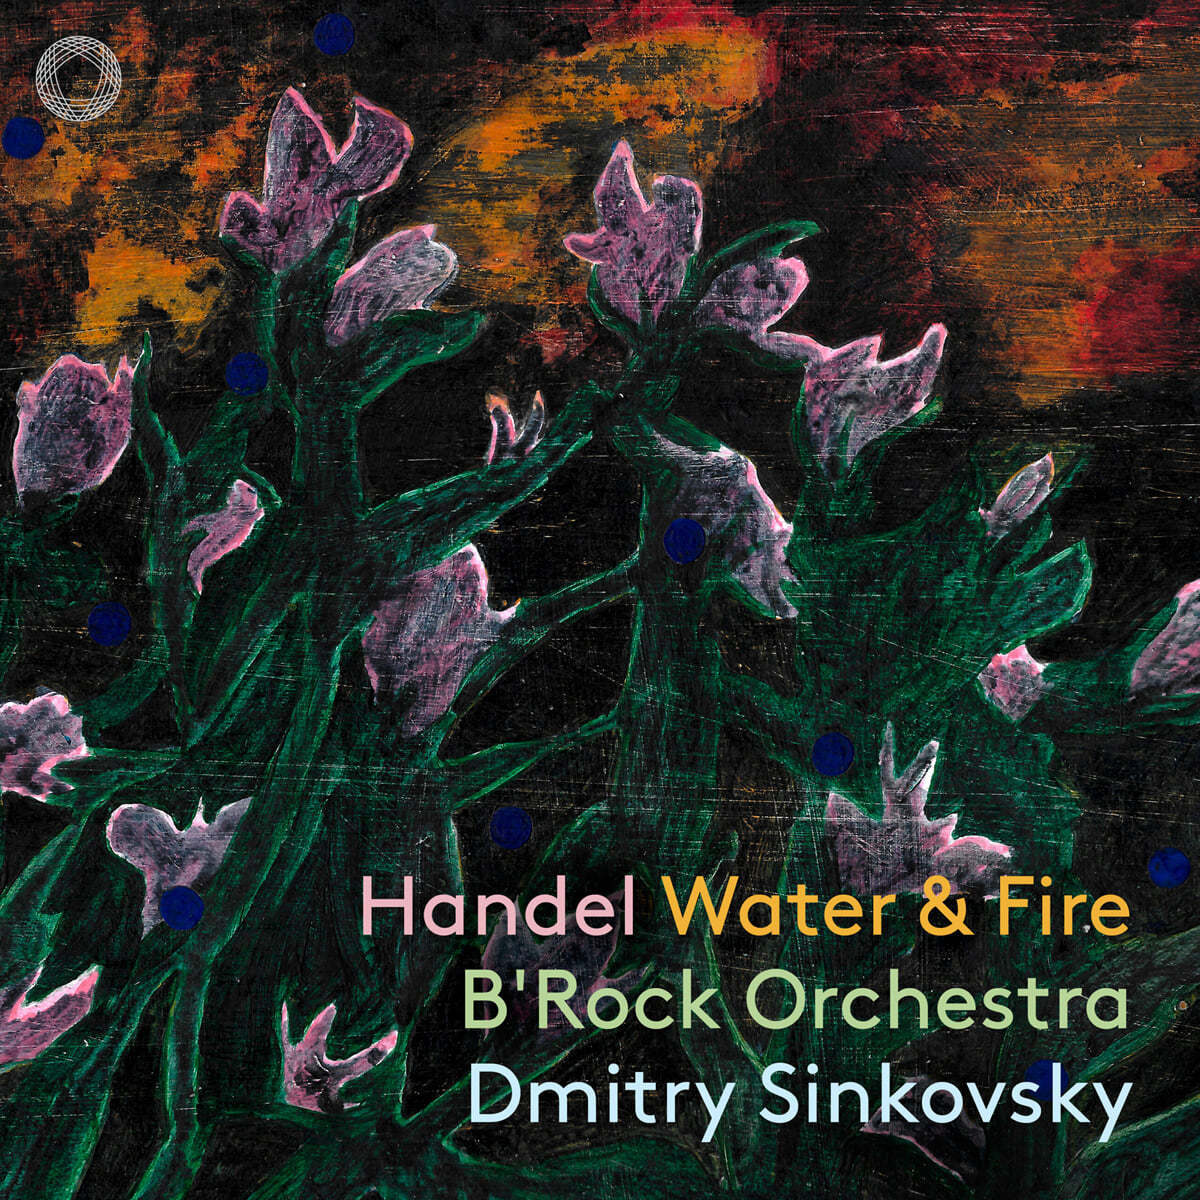 Dmitry Sinkovsky 헨델: 수상 음악, 왕궁의 불꽃 놀이 (Handel: Water Music and Music For the Royal Fireworks)